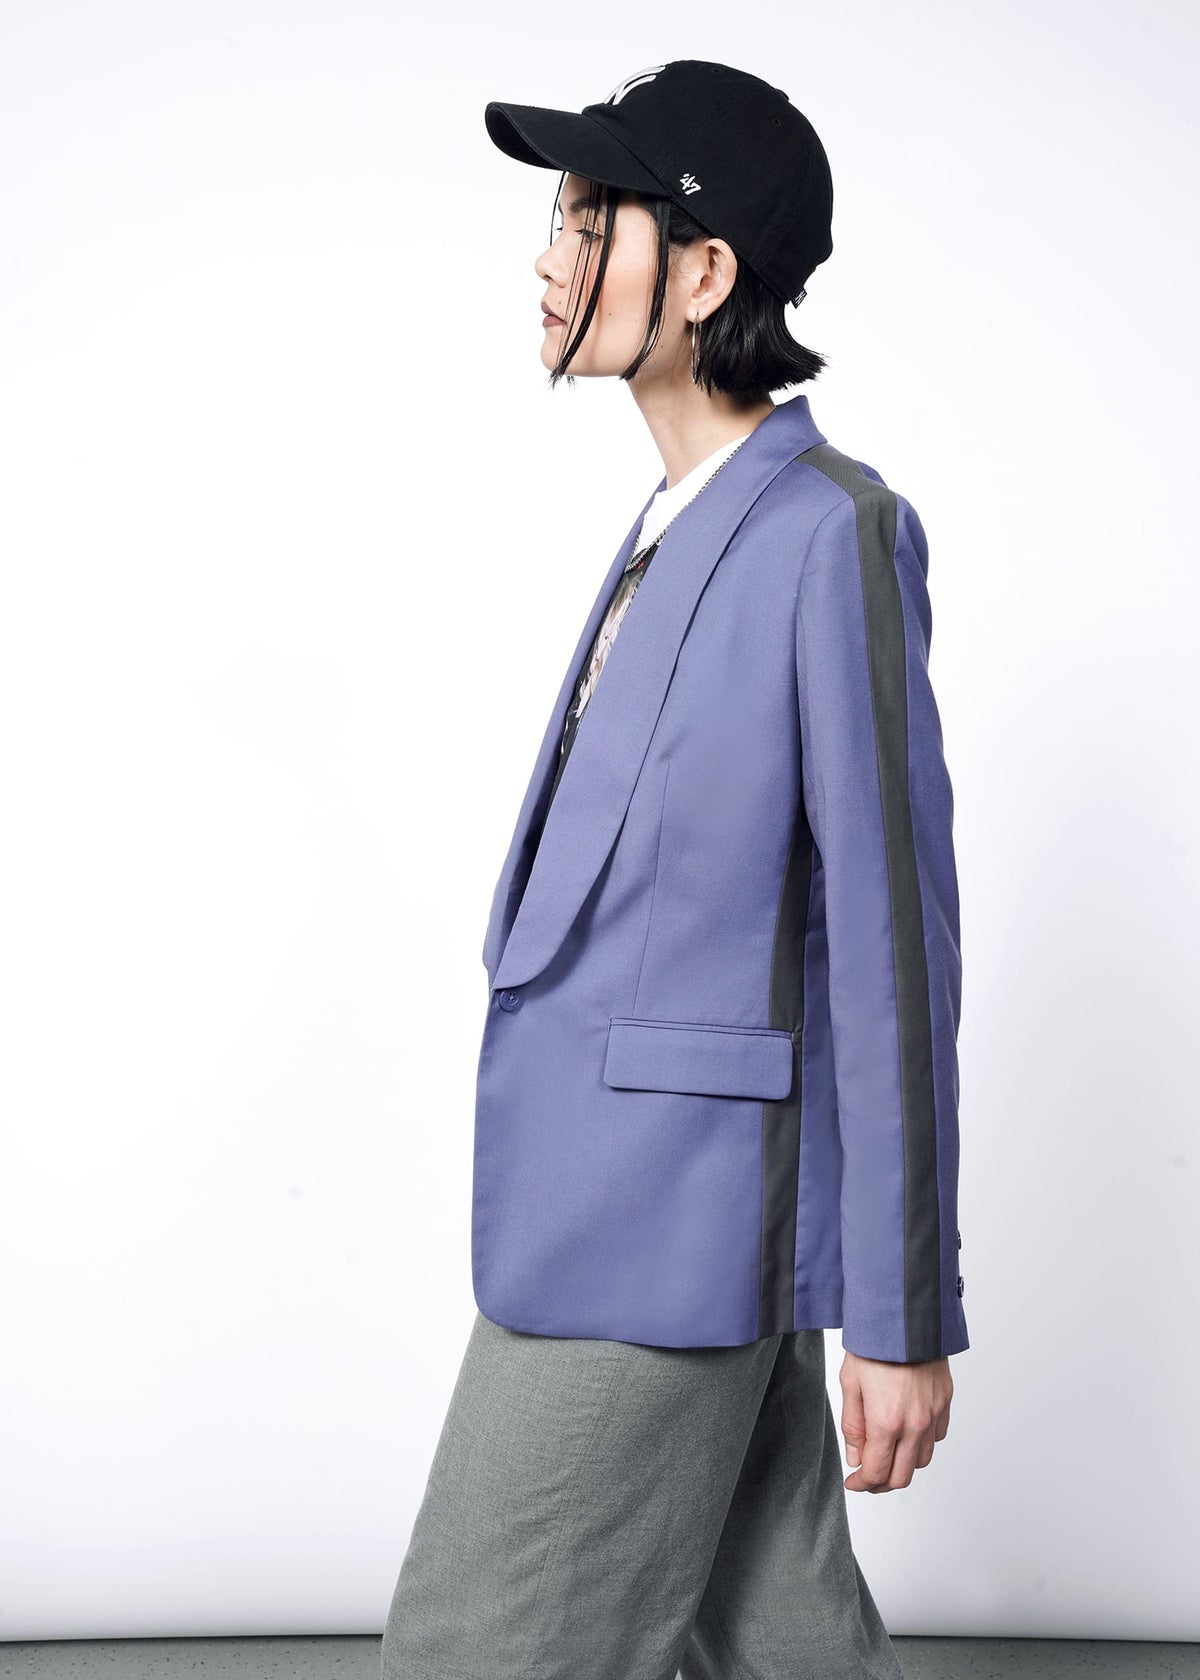 The Empower Colorblock Tux Blazer in Blueberry / Charcoal